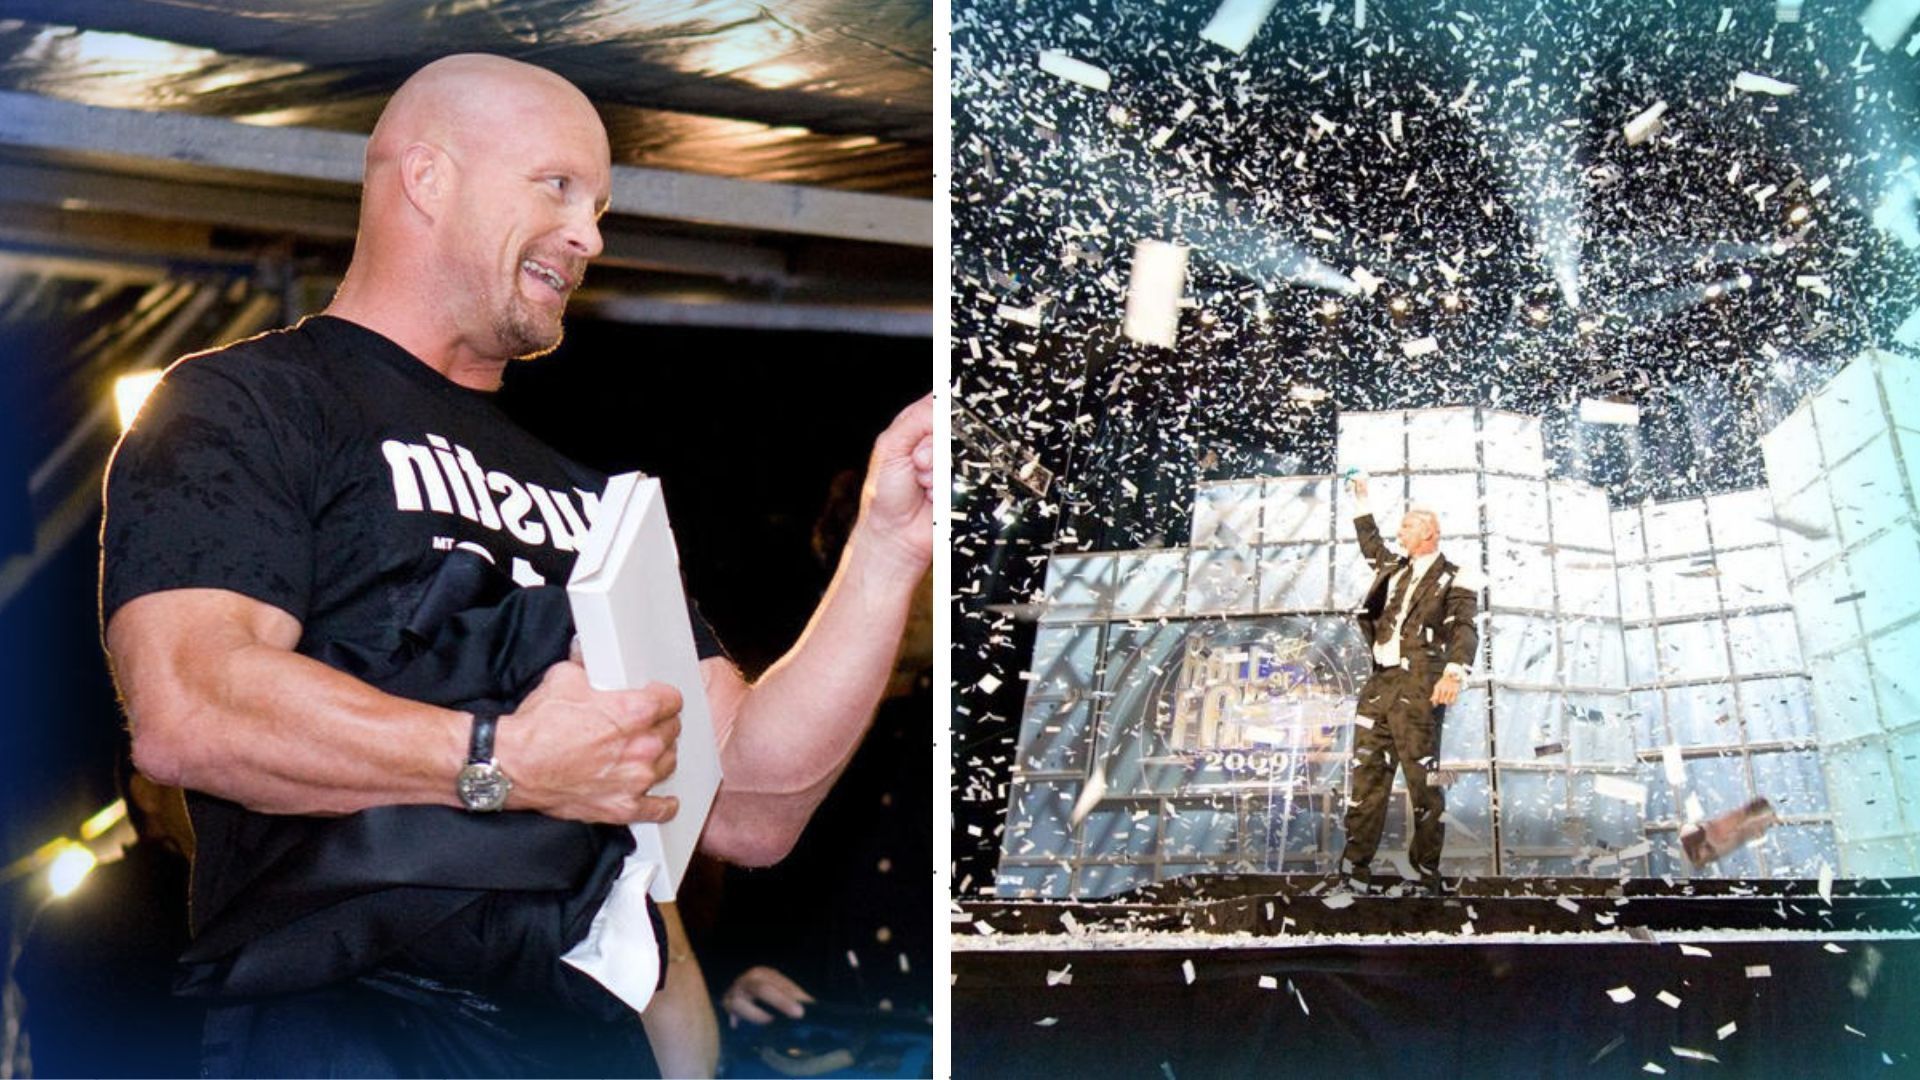 Steve Austin was inducted into the Hall of Fame class of 2009